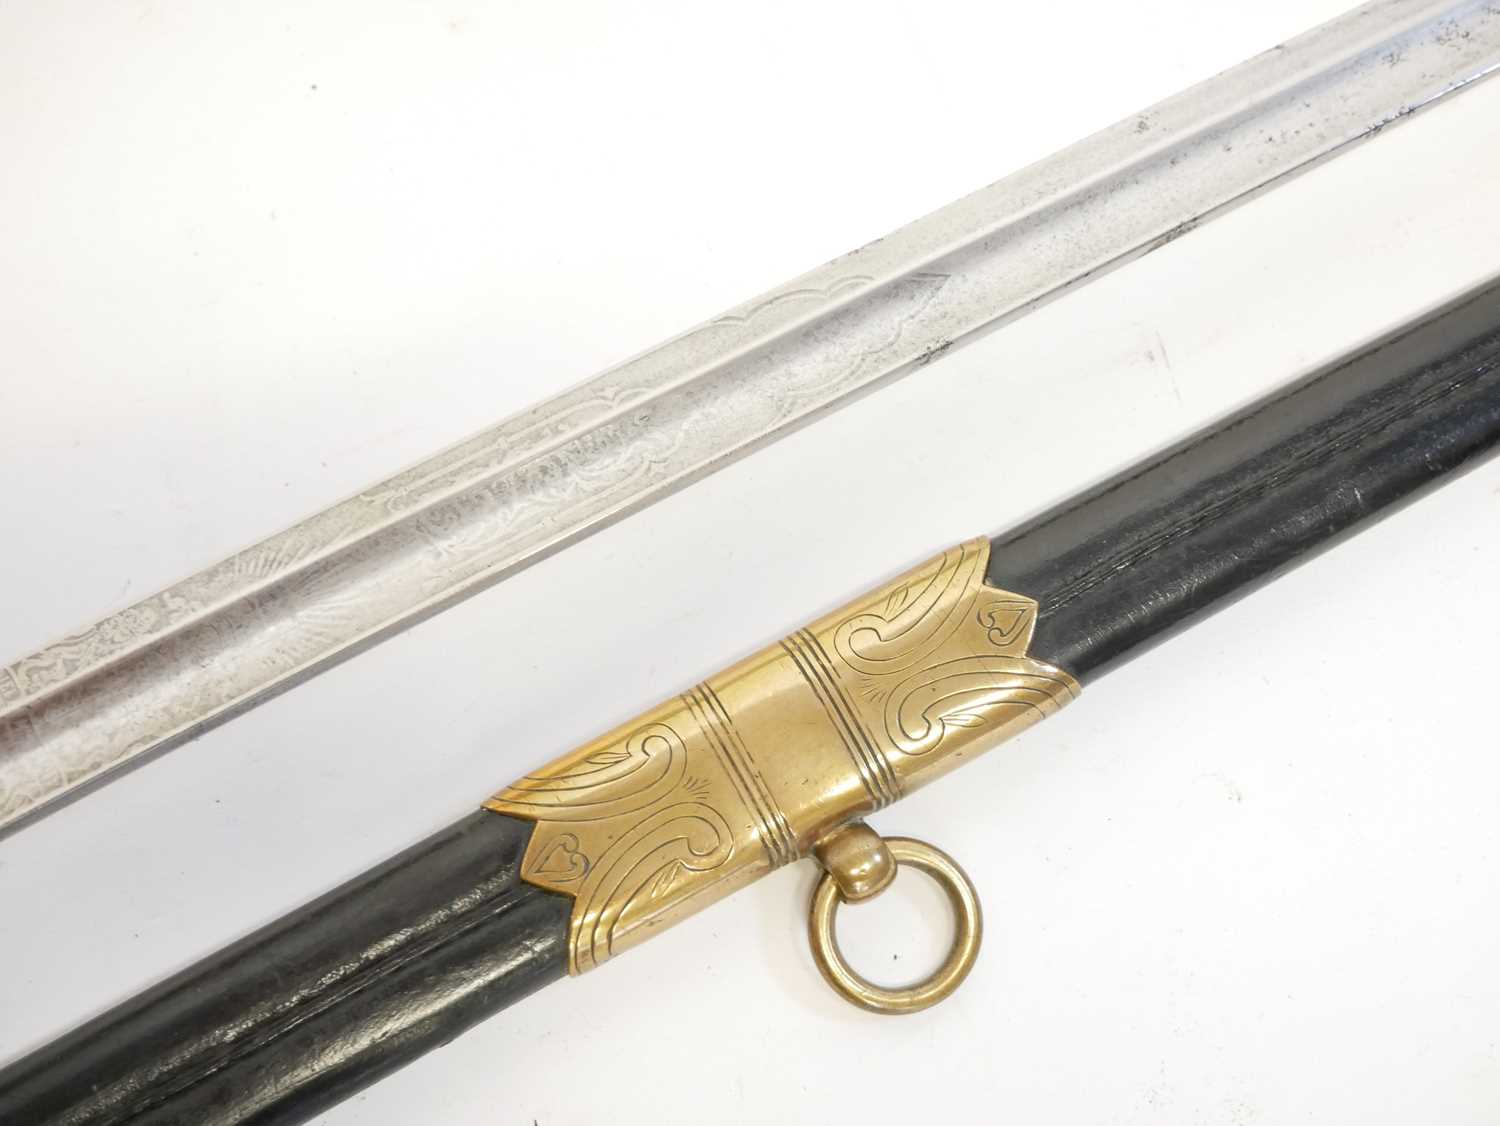 Royal Navy Petty Officer's sword, similar to an 1827 Naval sword but without the lion head pommel, - Image 14 of 16